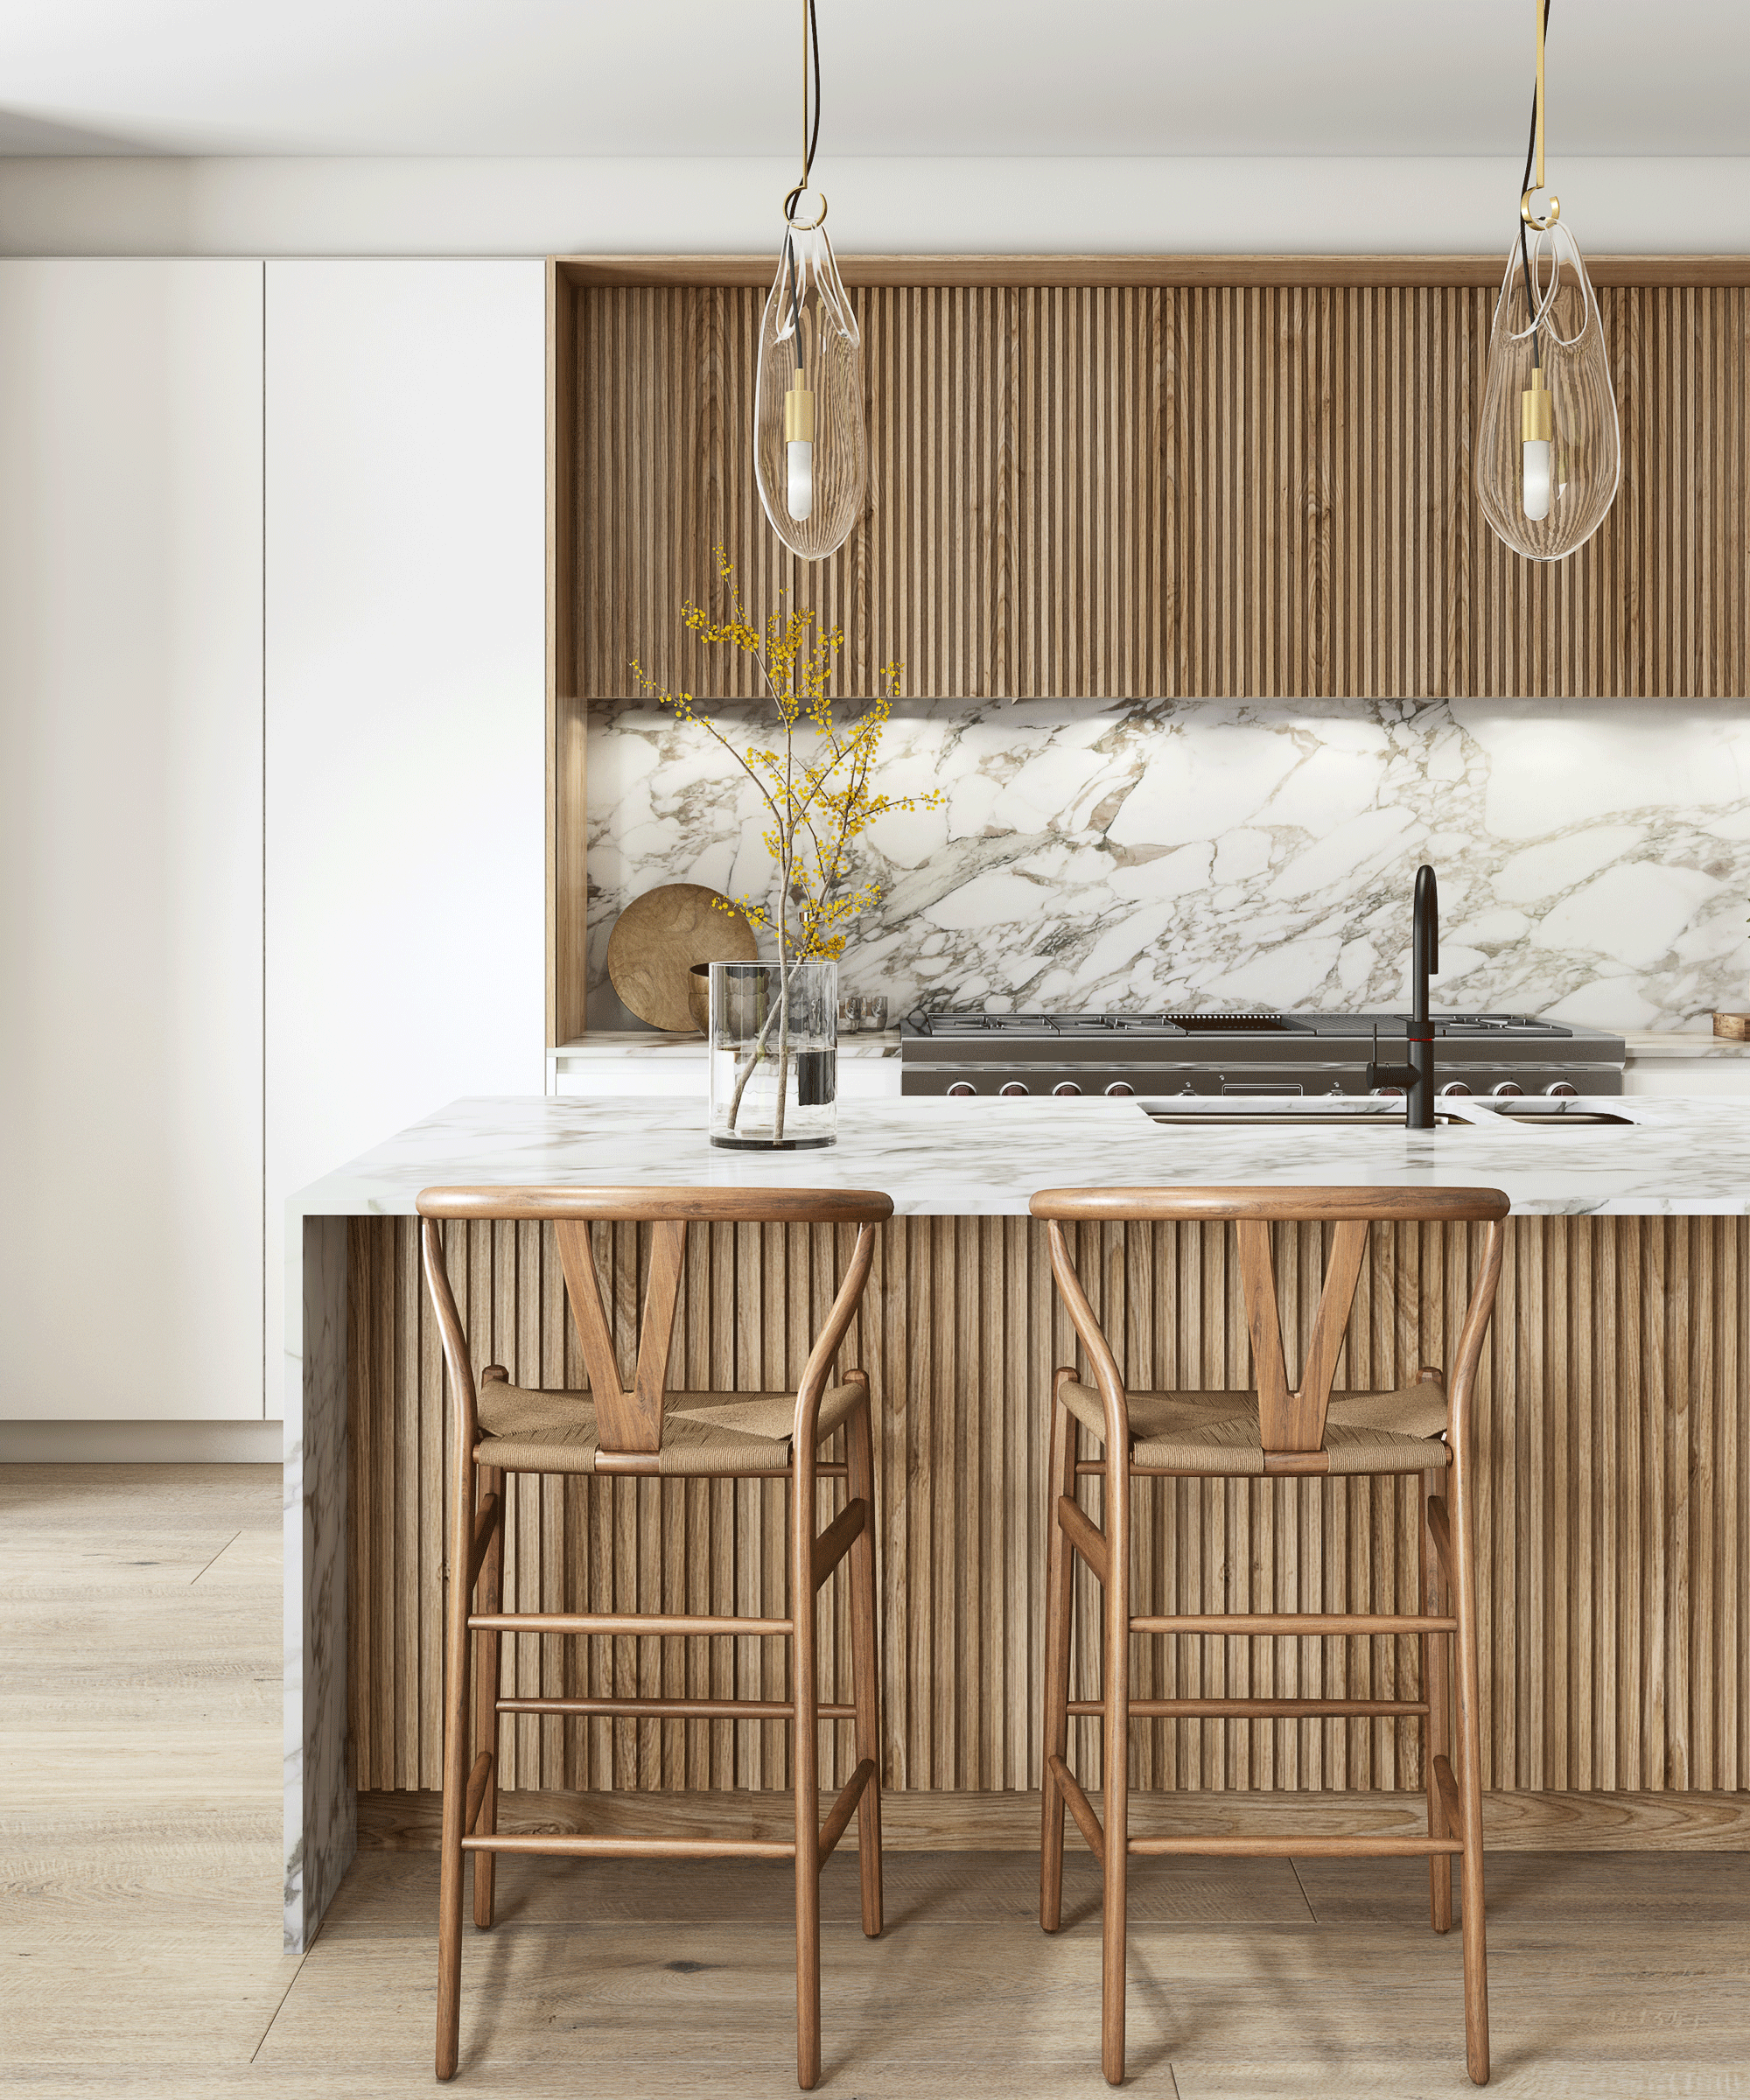 fluted wood cabinets with marble countertop and backsplash